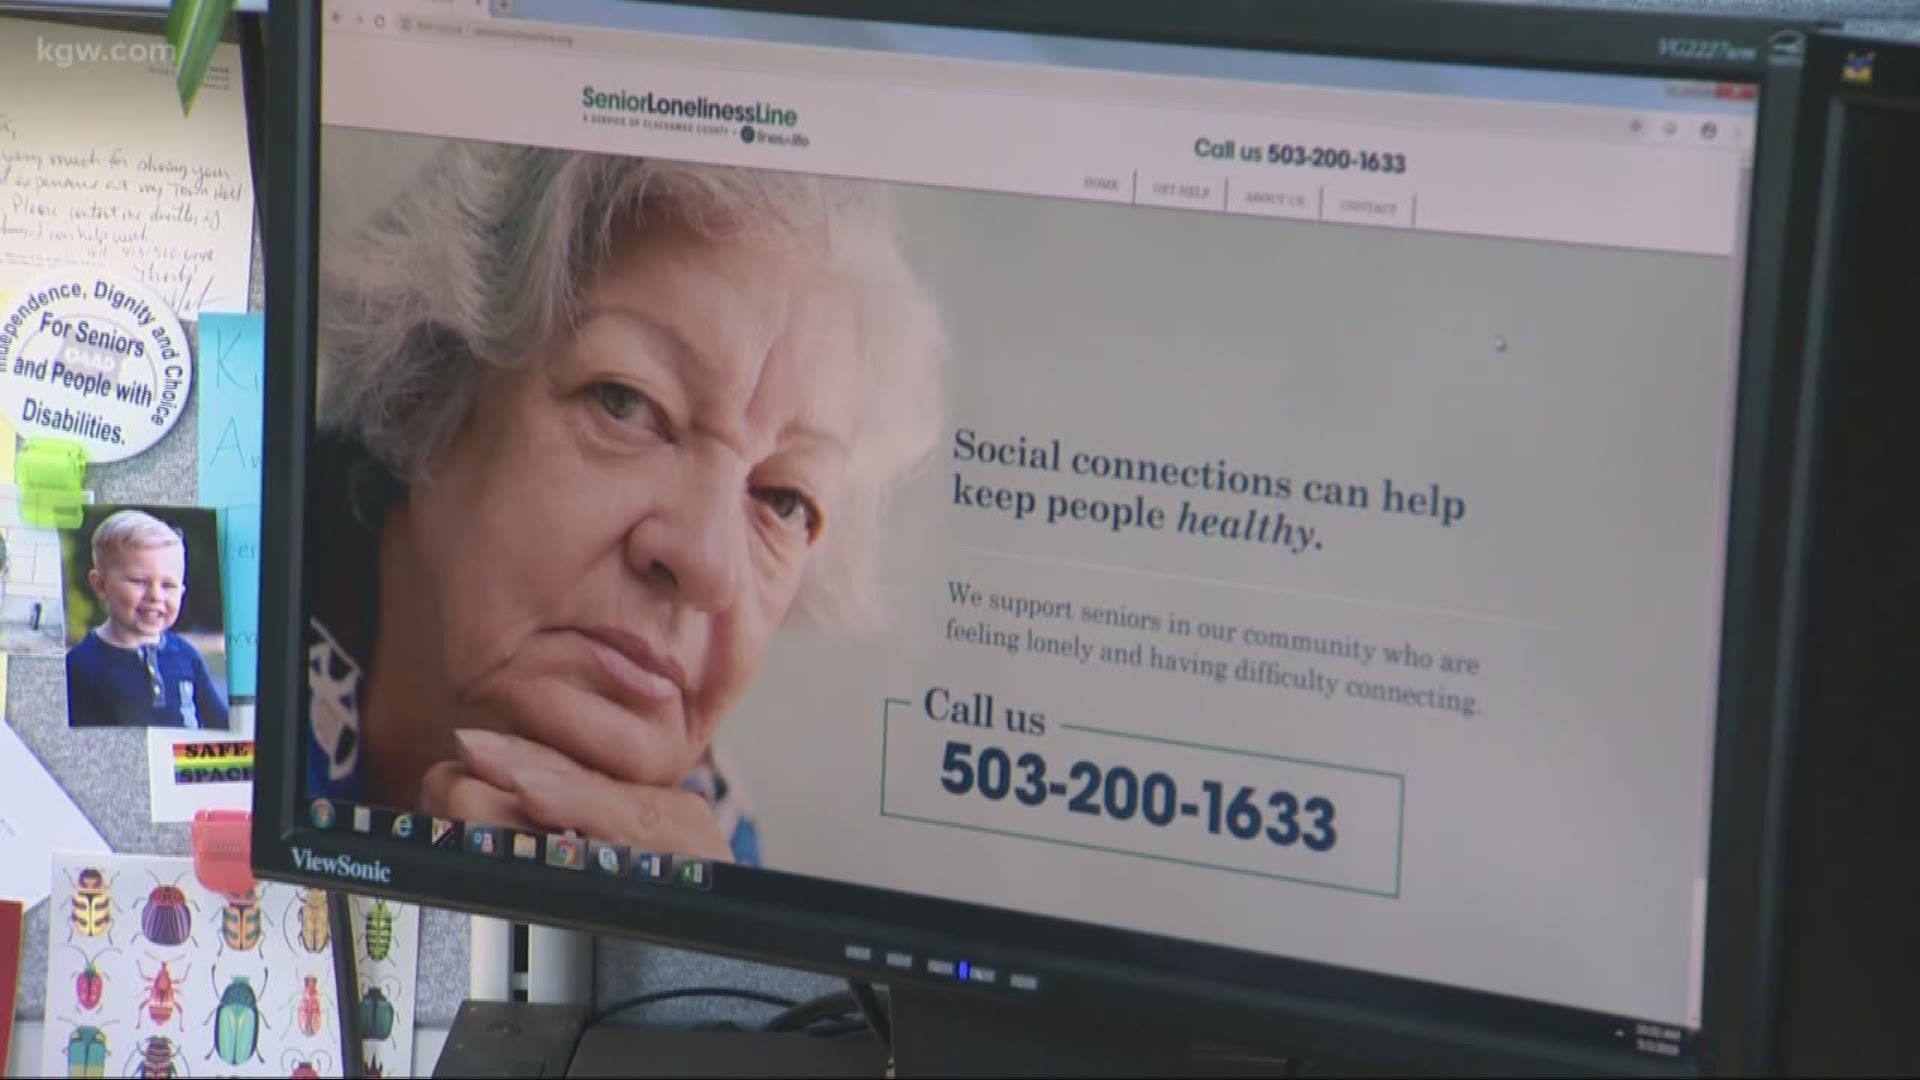 How agencies are working to prevent suicide among older people.